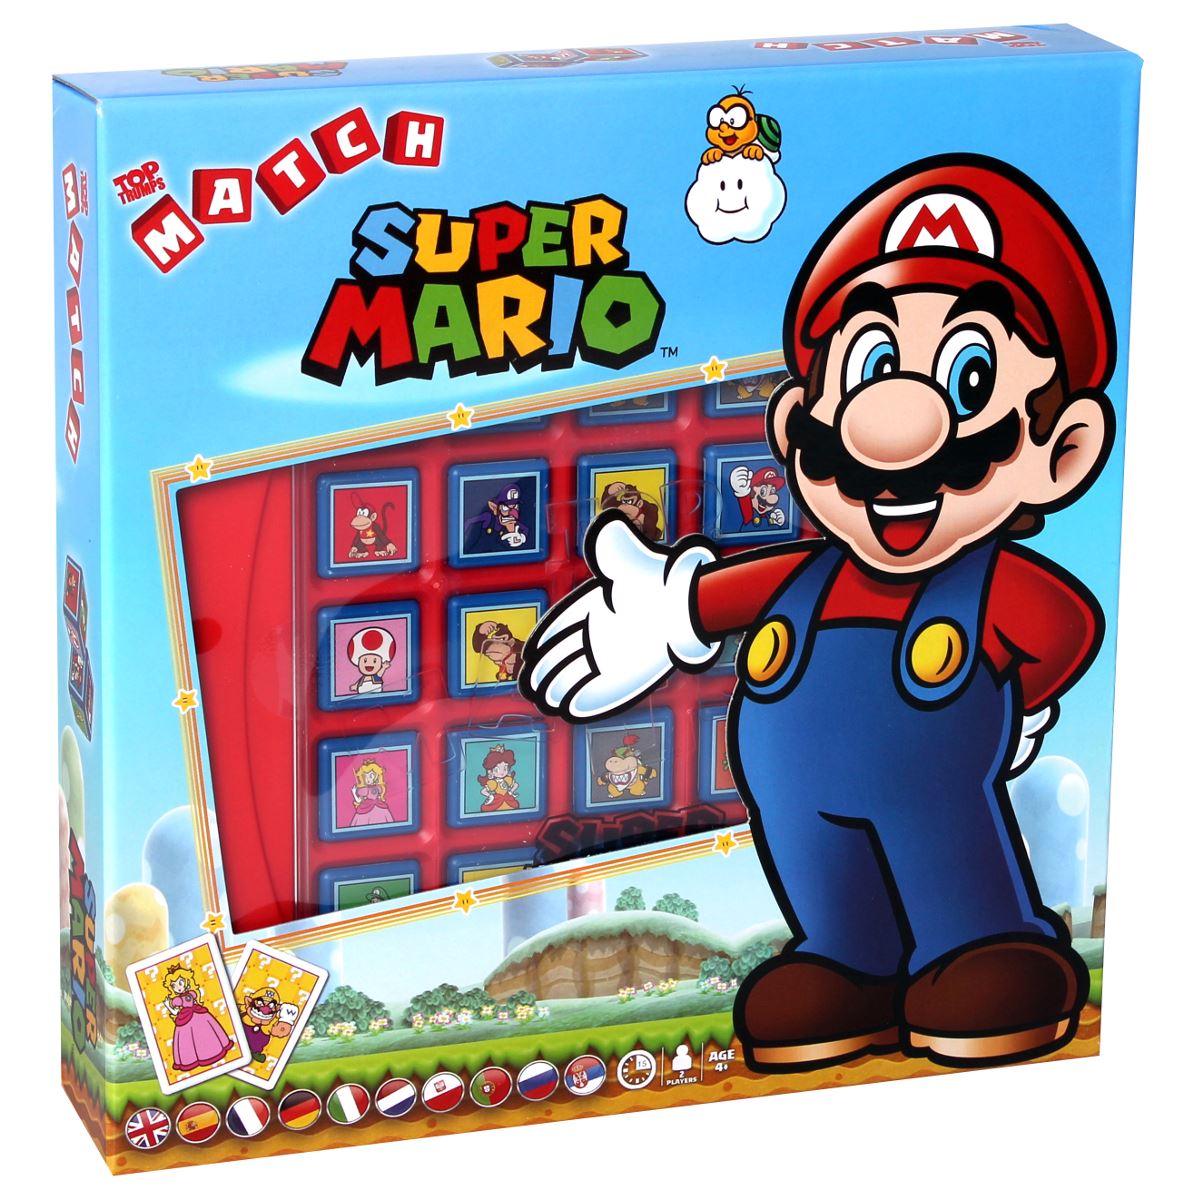 MATCH SUPER MARIO THE CRAZY CUBE GAME OFFICIAL NINTENDO BOARD GAME NEW  SEALED